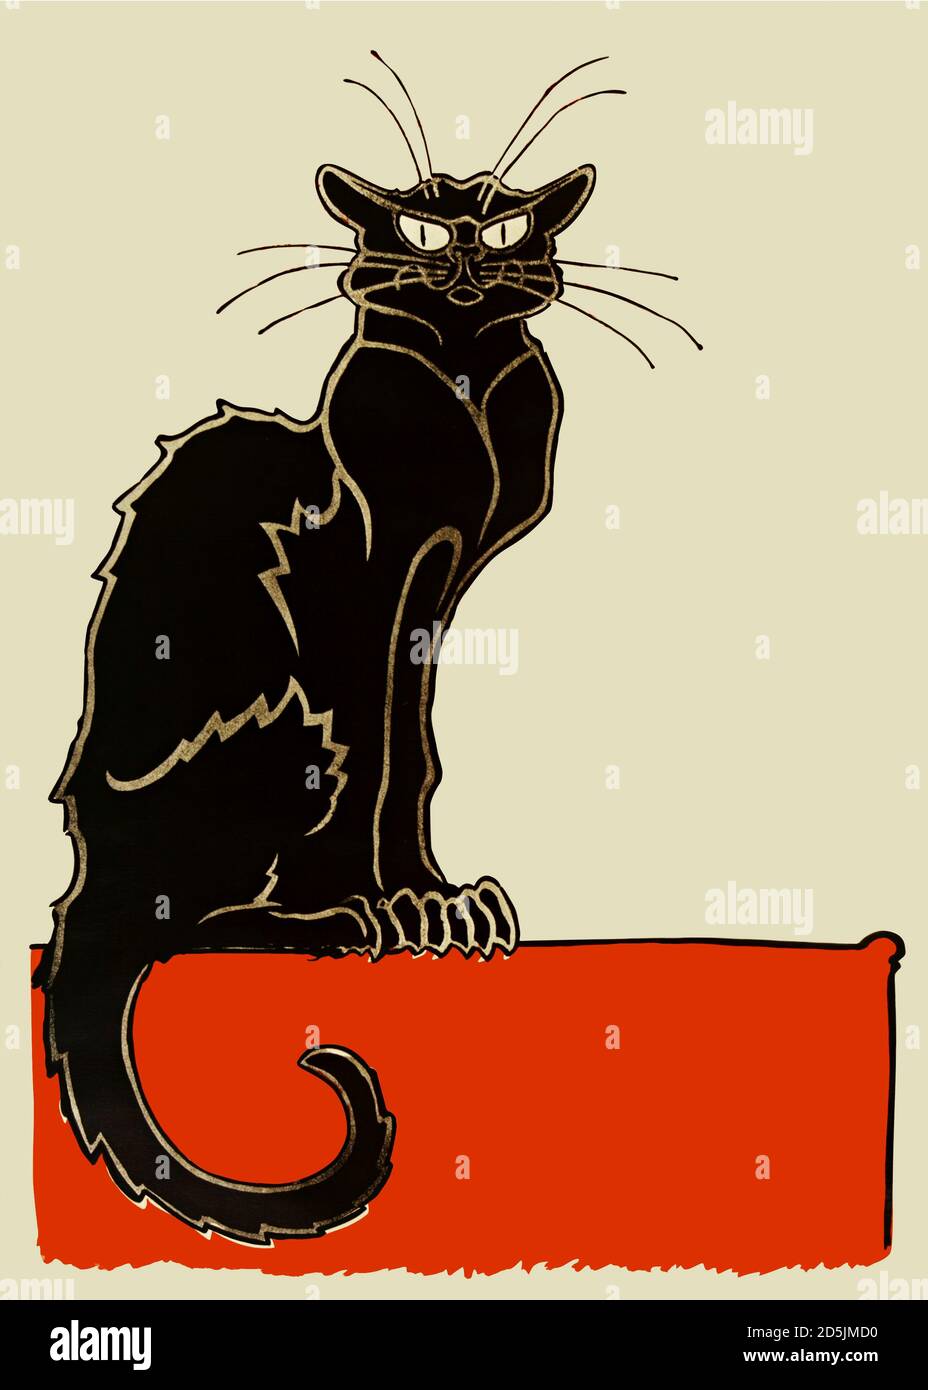 Clipart of The Black Cat cabare (Le Chat Noir). Based on a drawing by Theophile Alexandre  Steinlen. 1895 Stock Photo